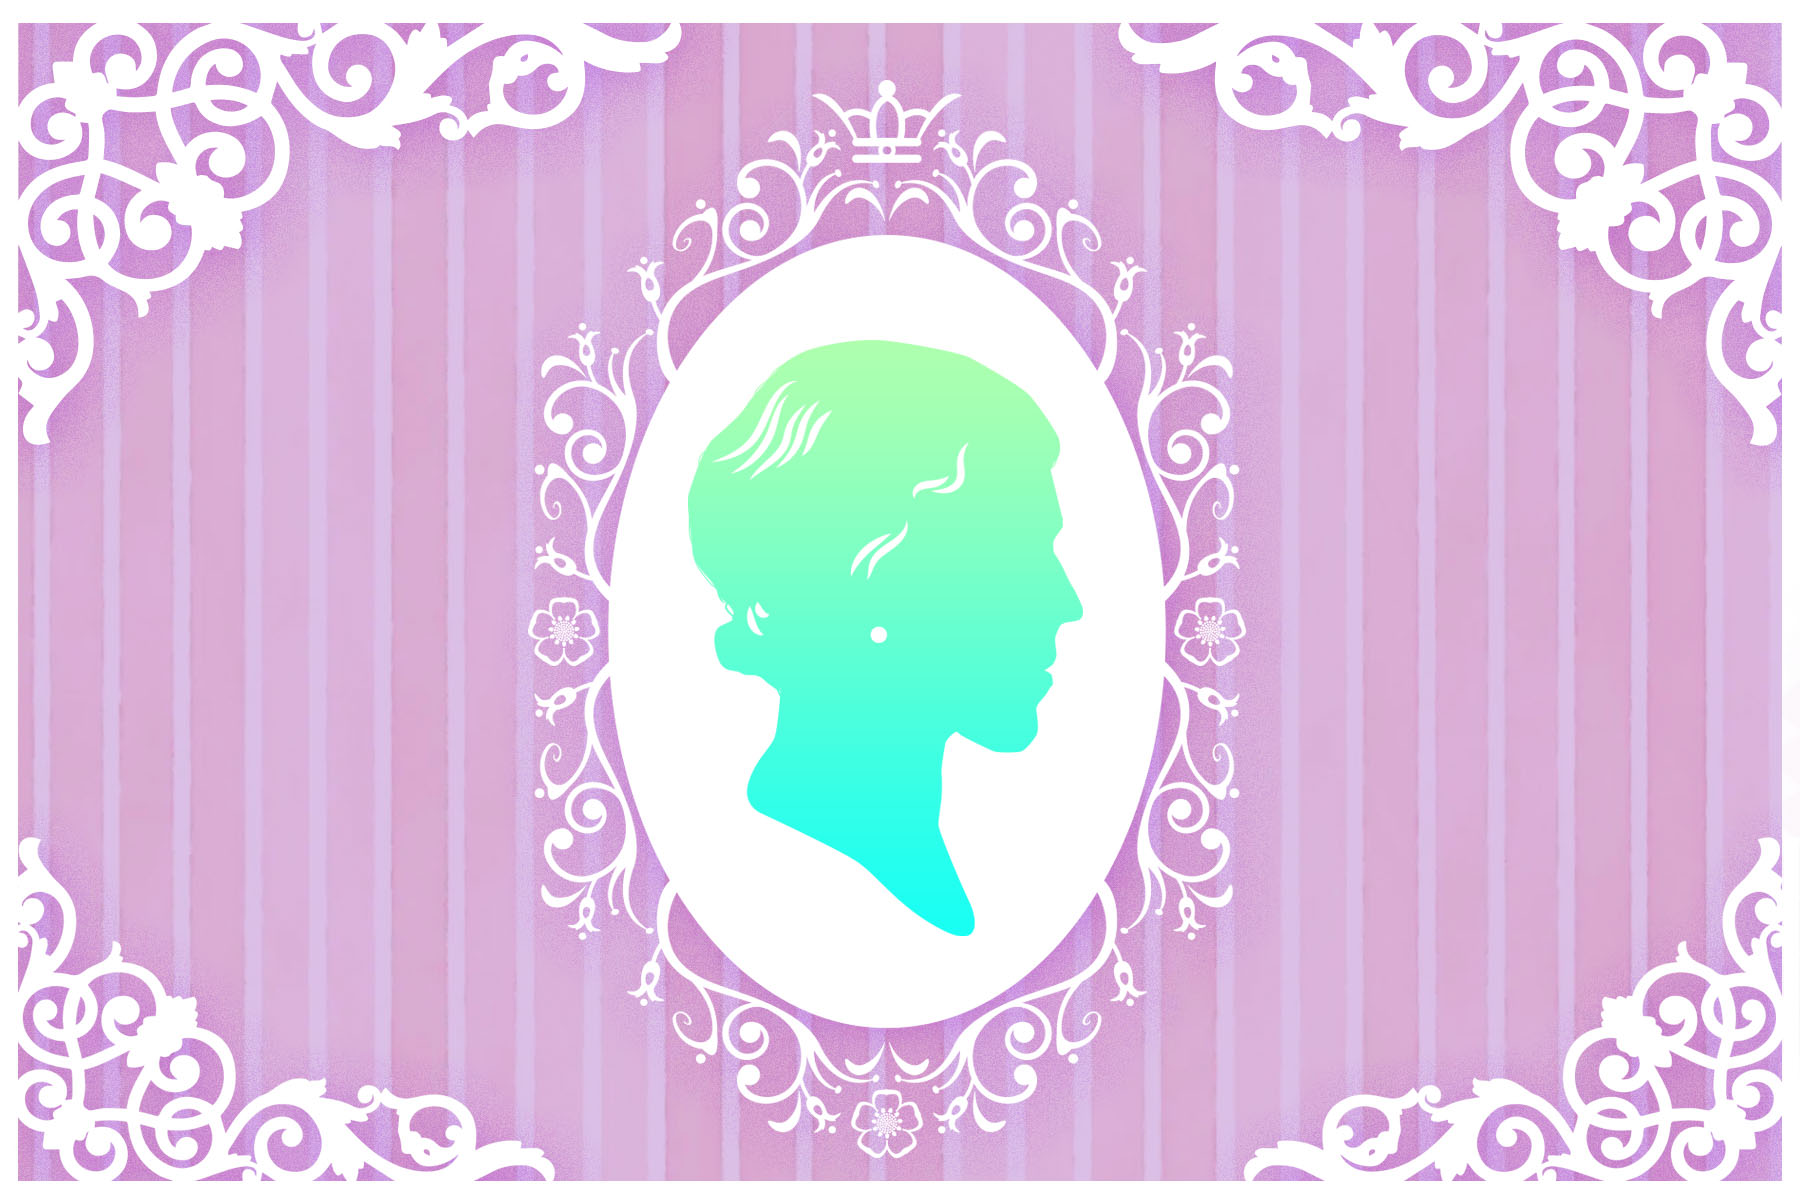 An illustration of a green cameo on a pink background